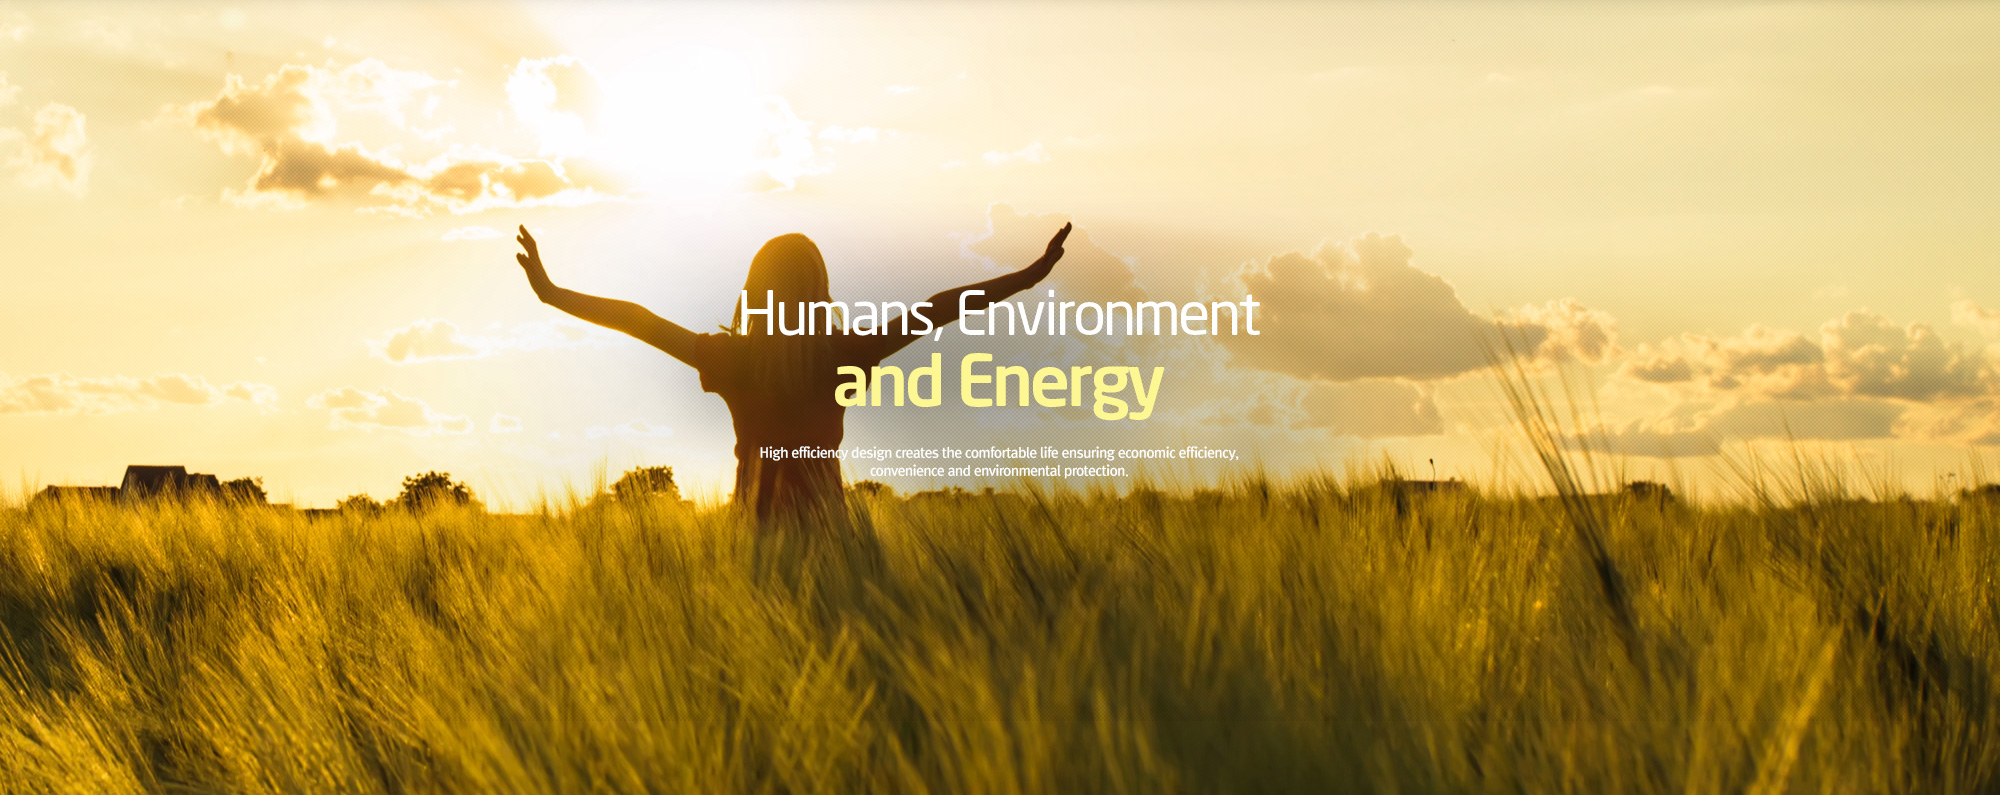 Humans, Environment and Energy